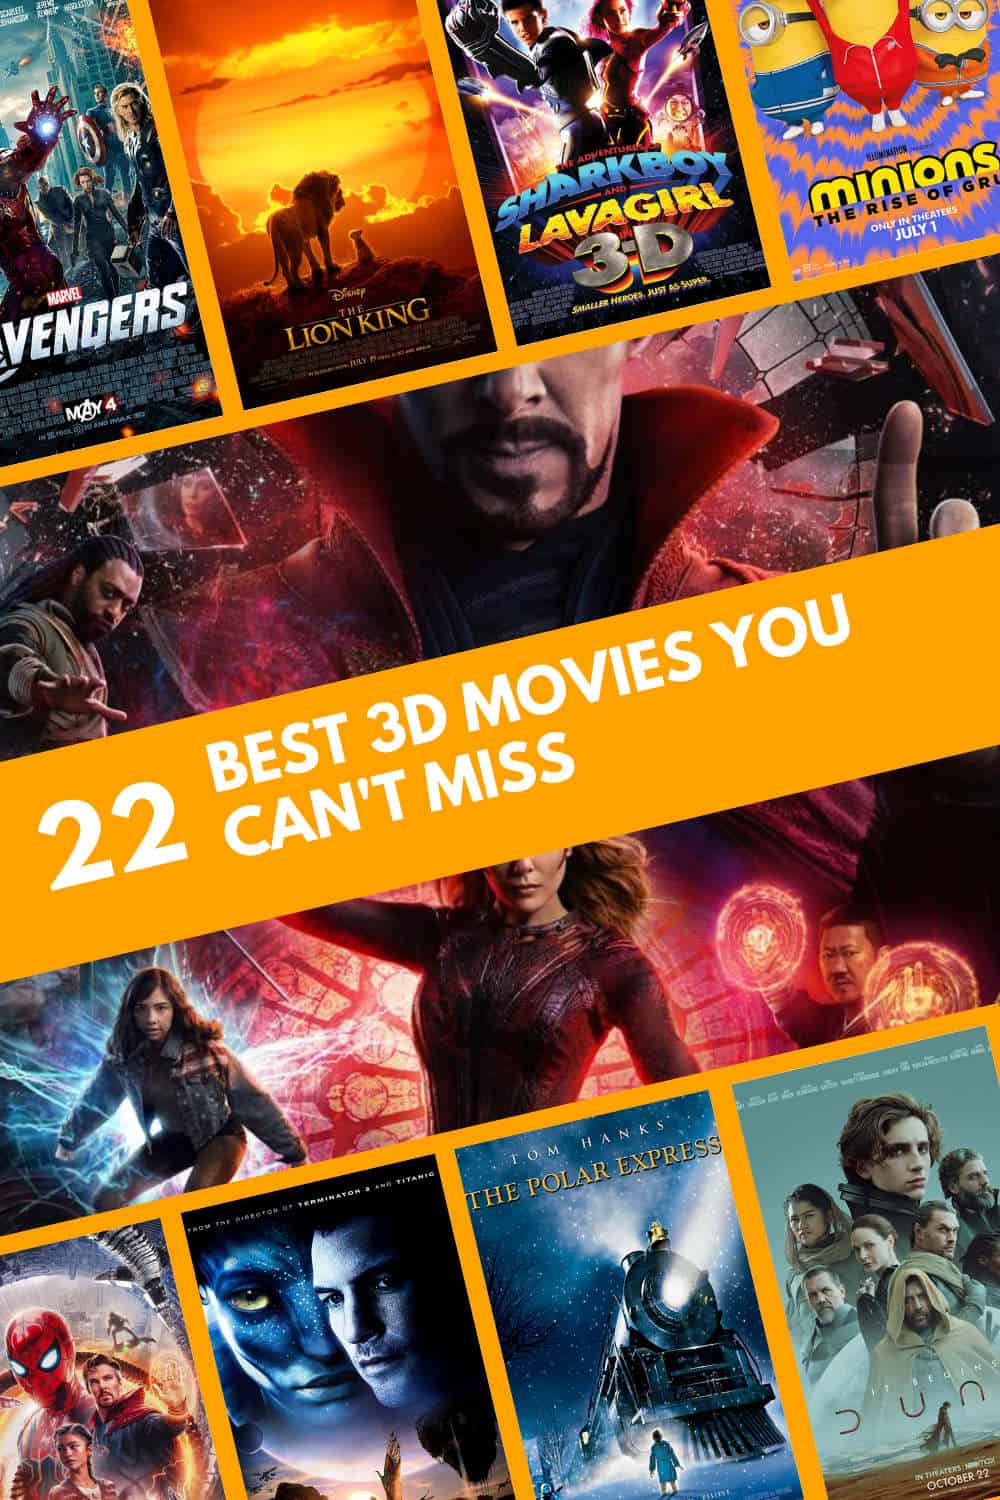 3D Movies You Can't Miss